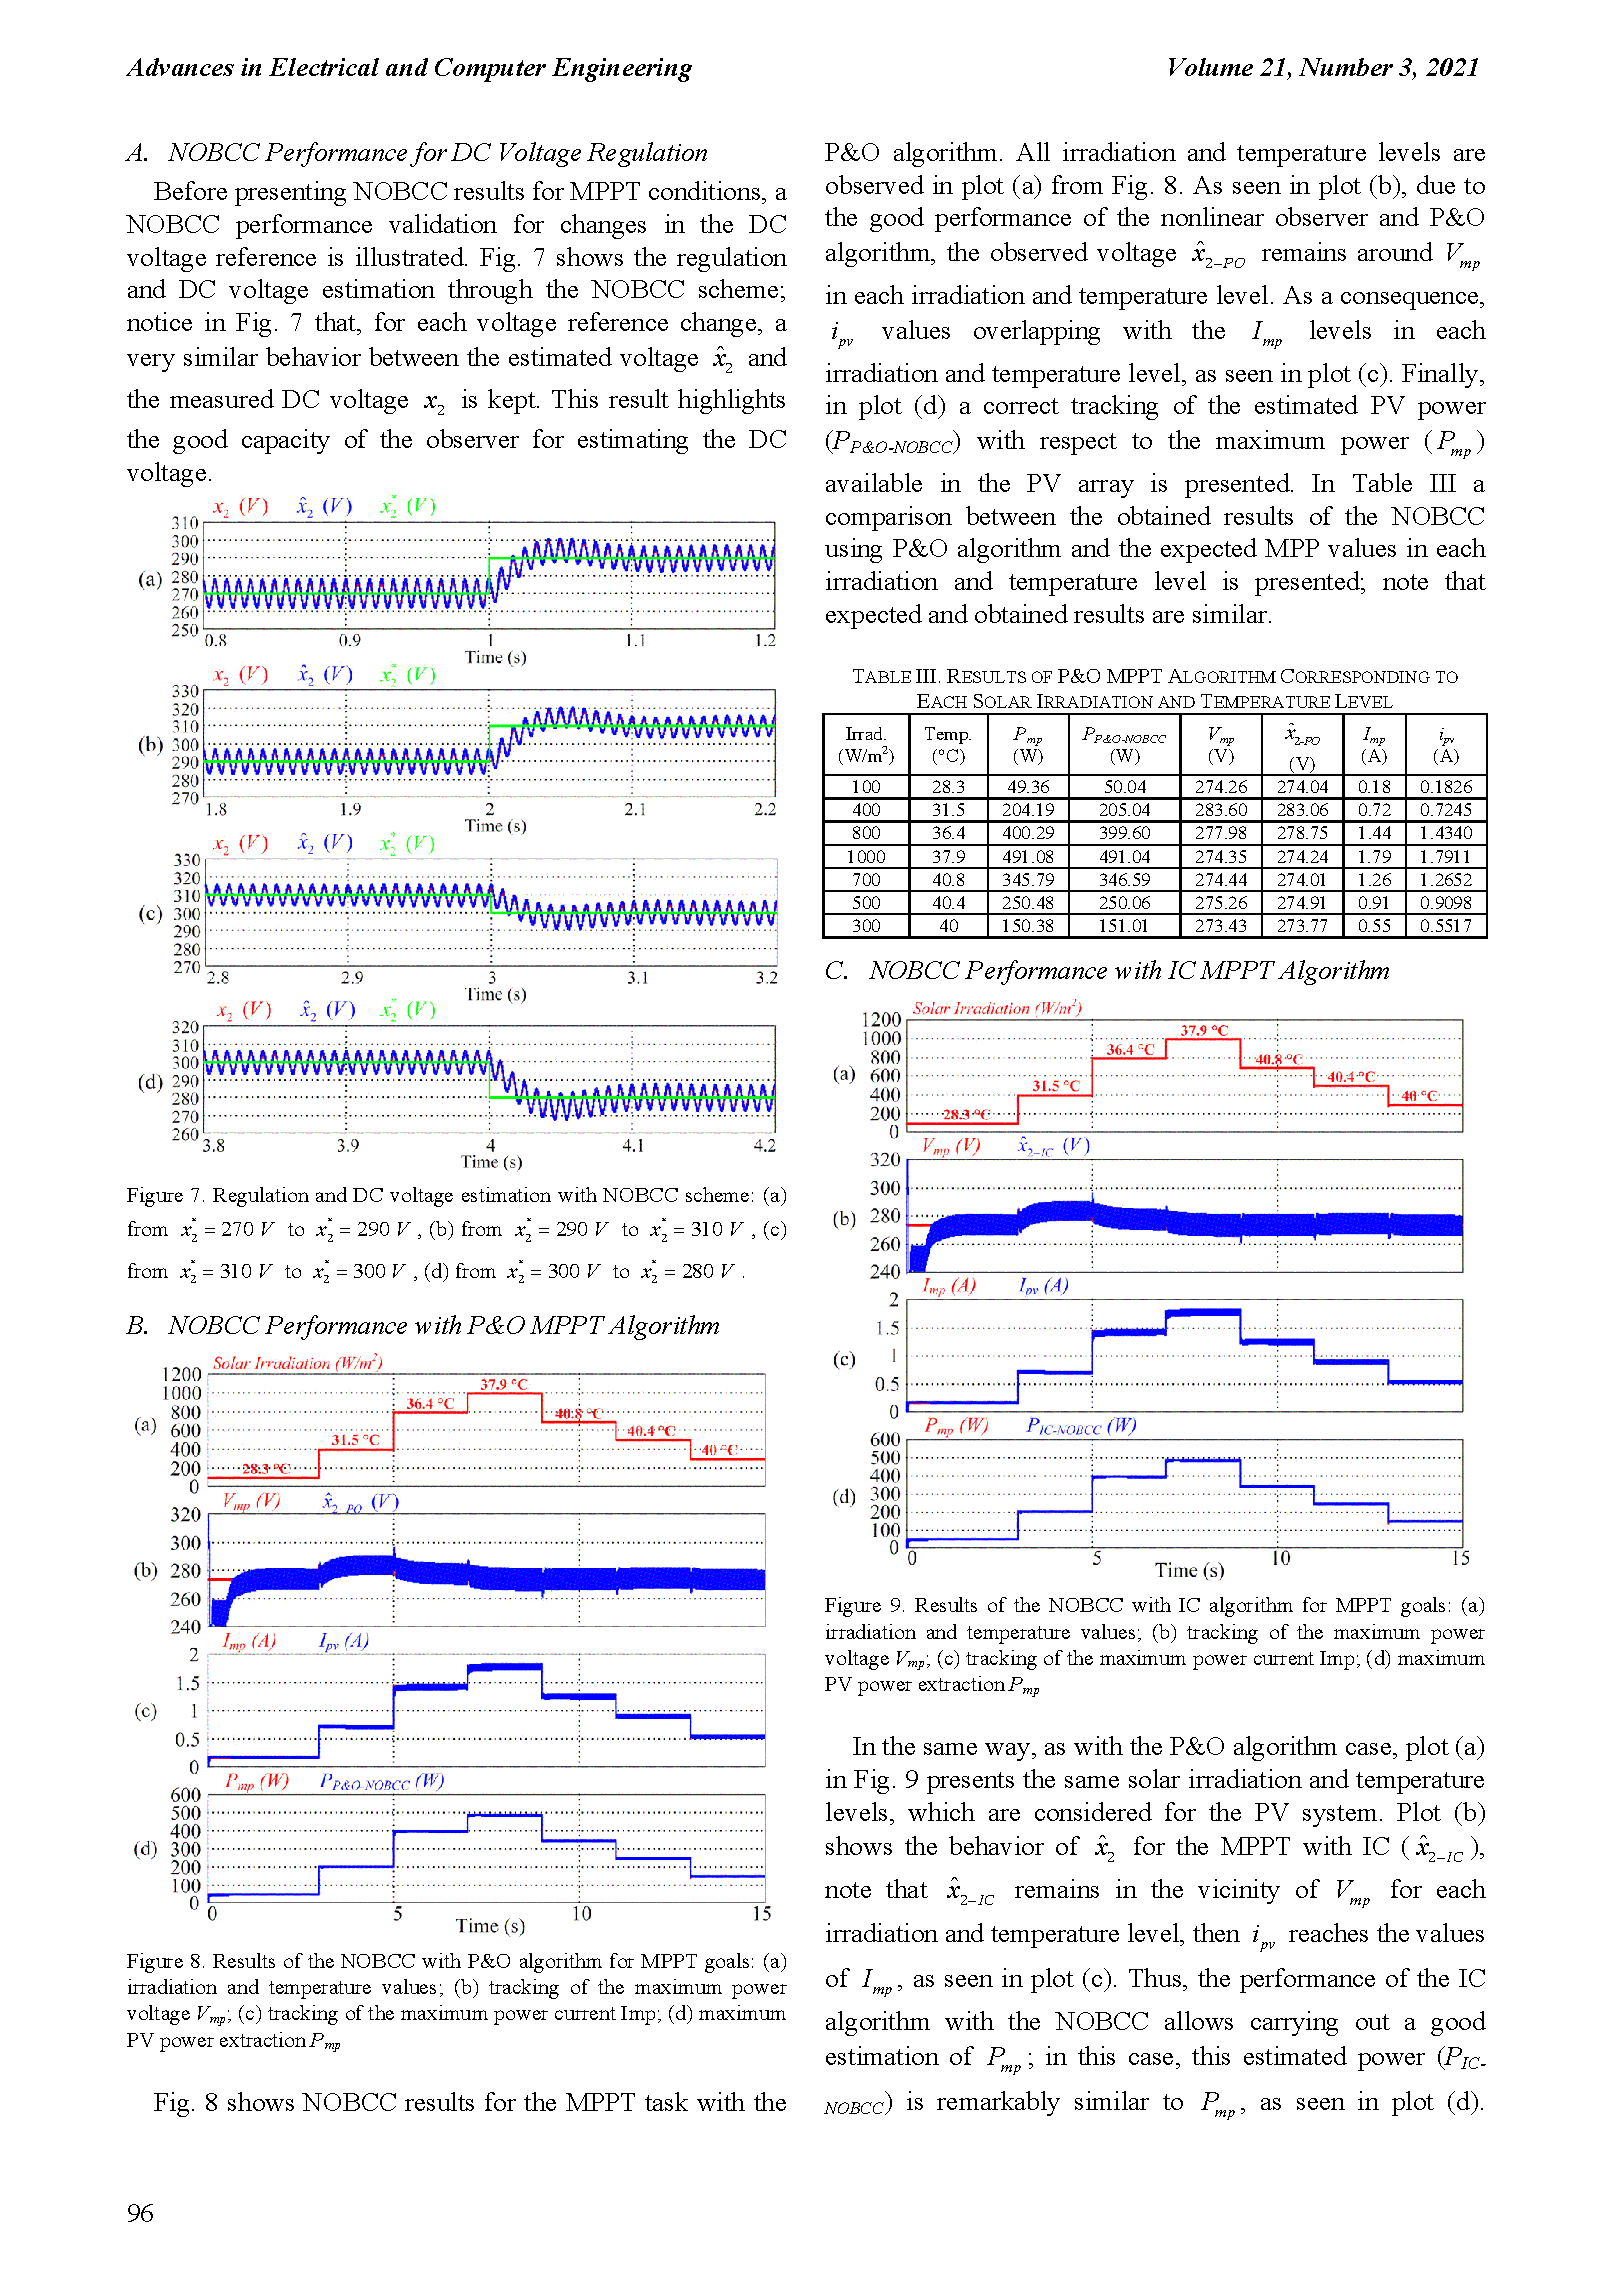 PDF Quickview for paper with DOI:10.4316/AECE.2021.03011